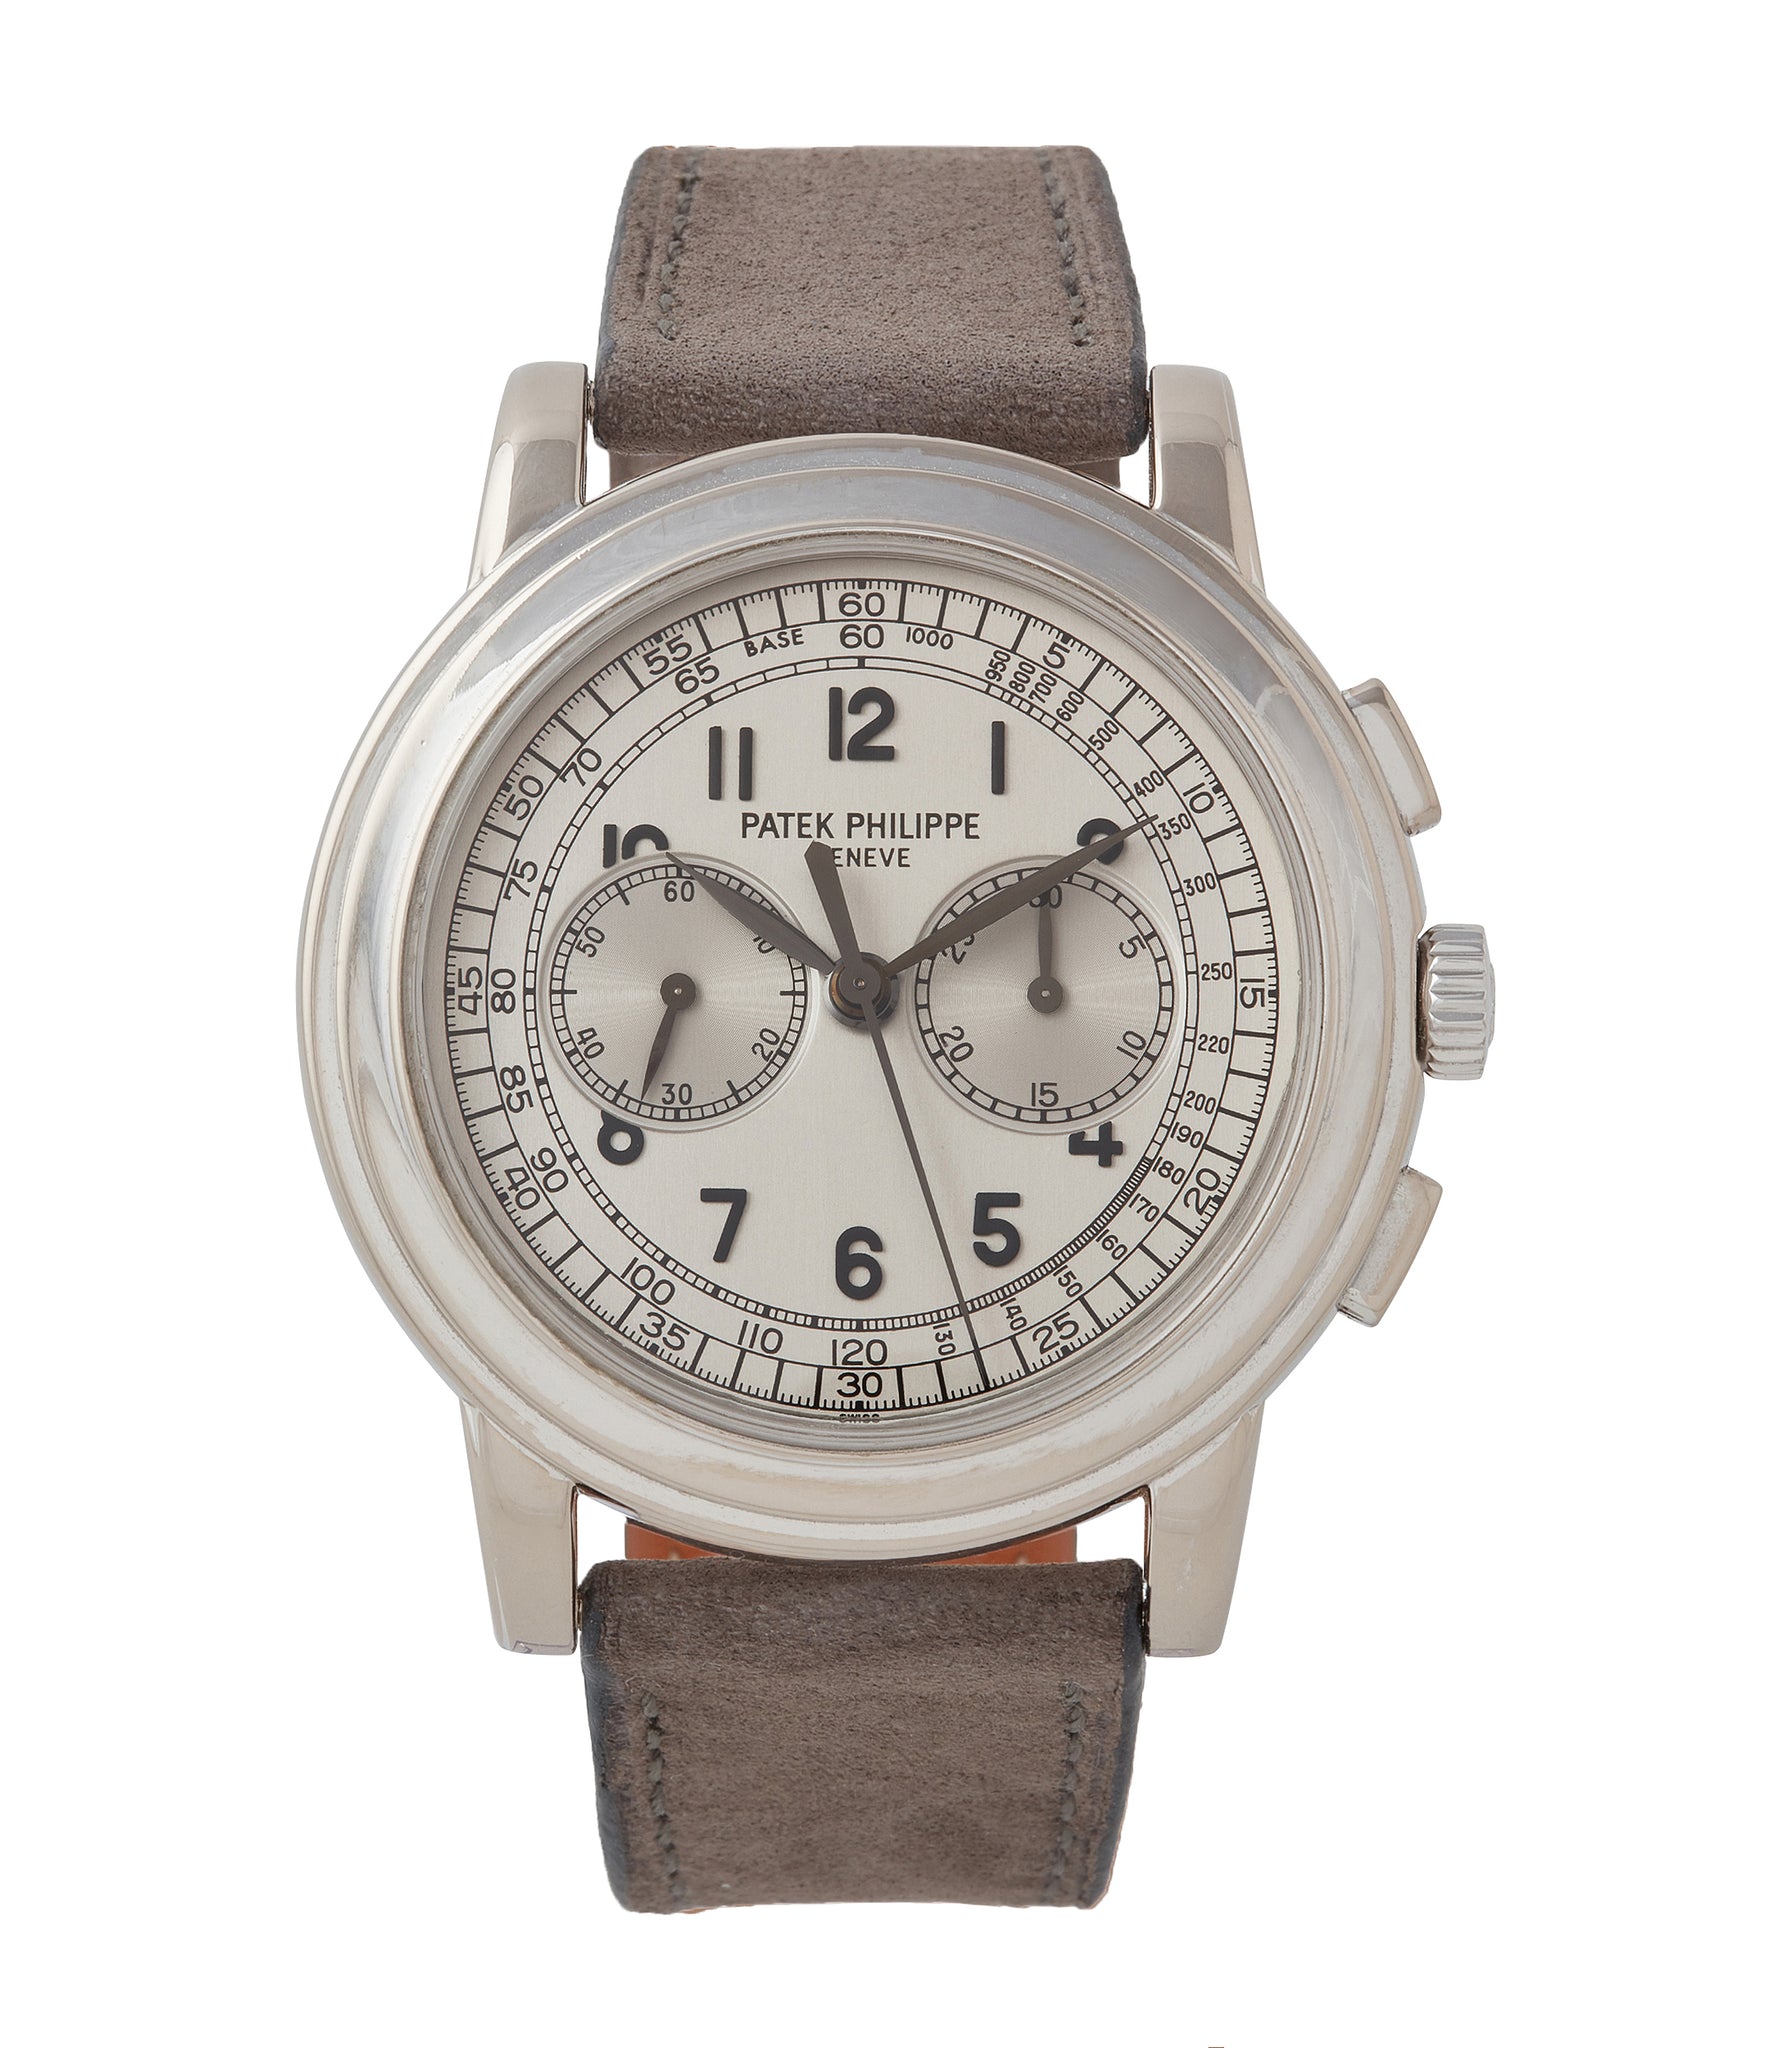 buy Patek Philippe 5070 Chronograph white gold dress watch for sale online at A Collected Man London UK specialist of rare watches